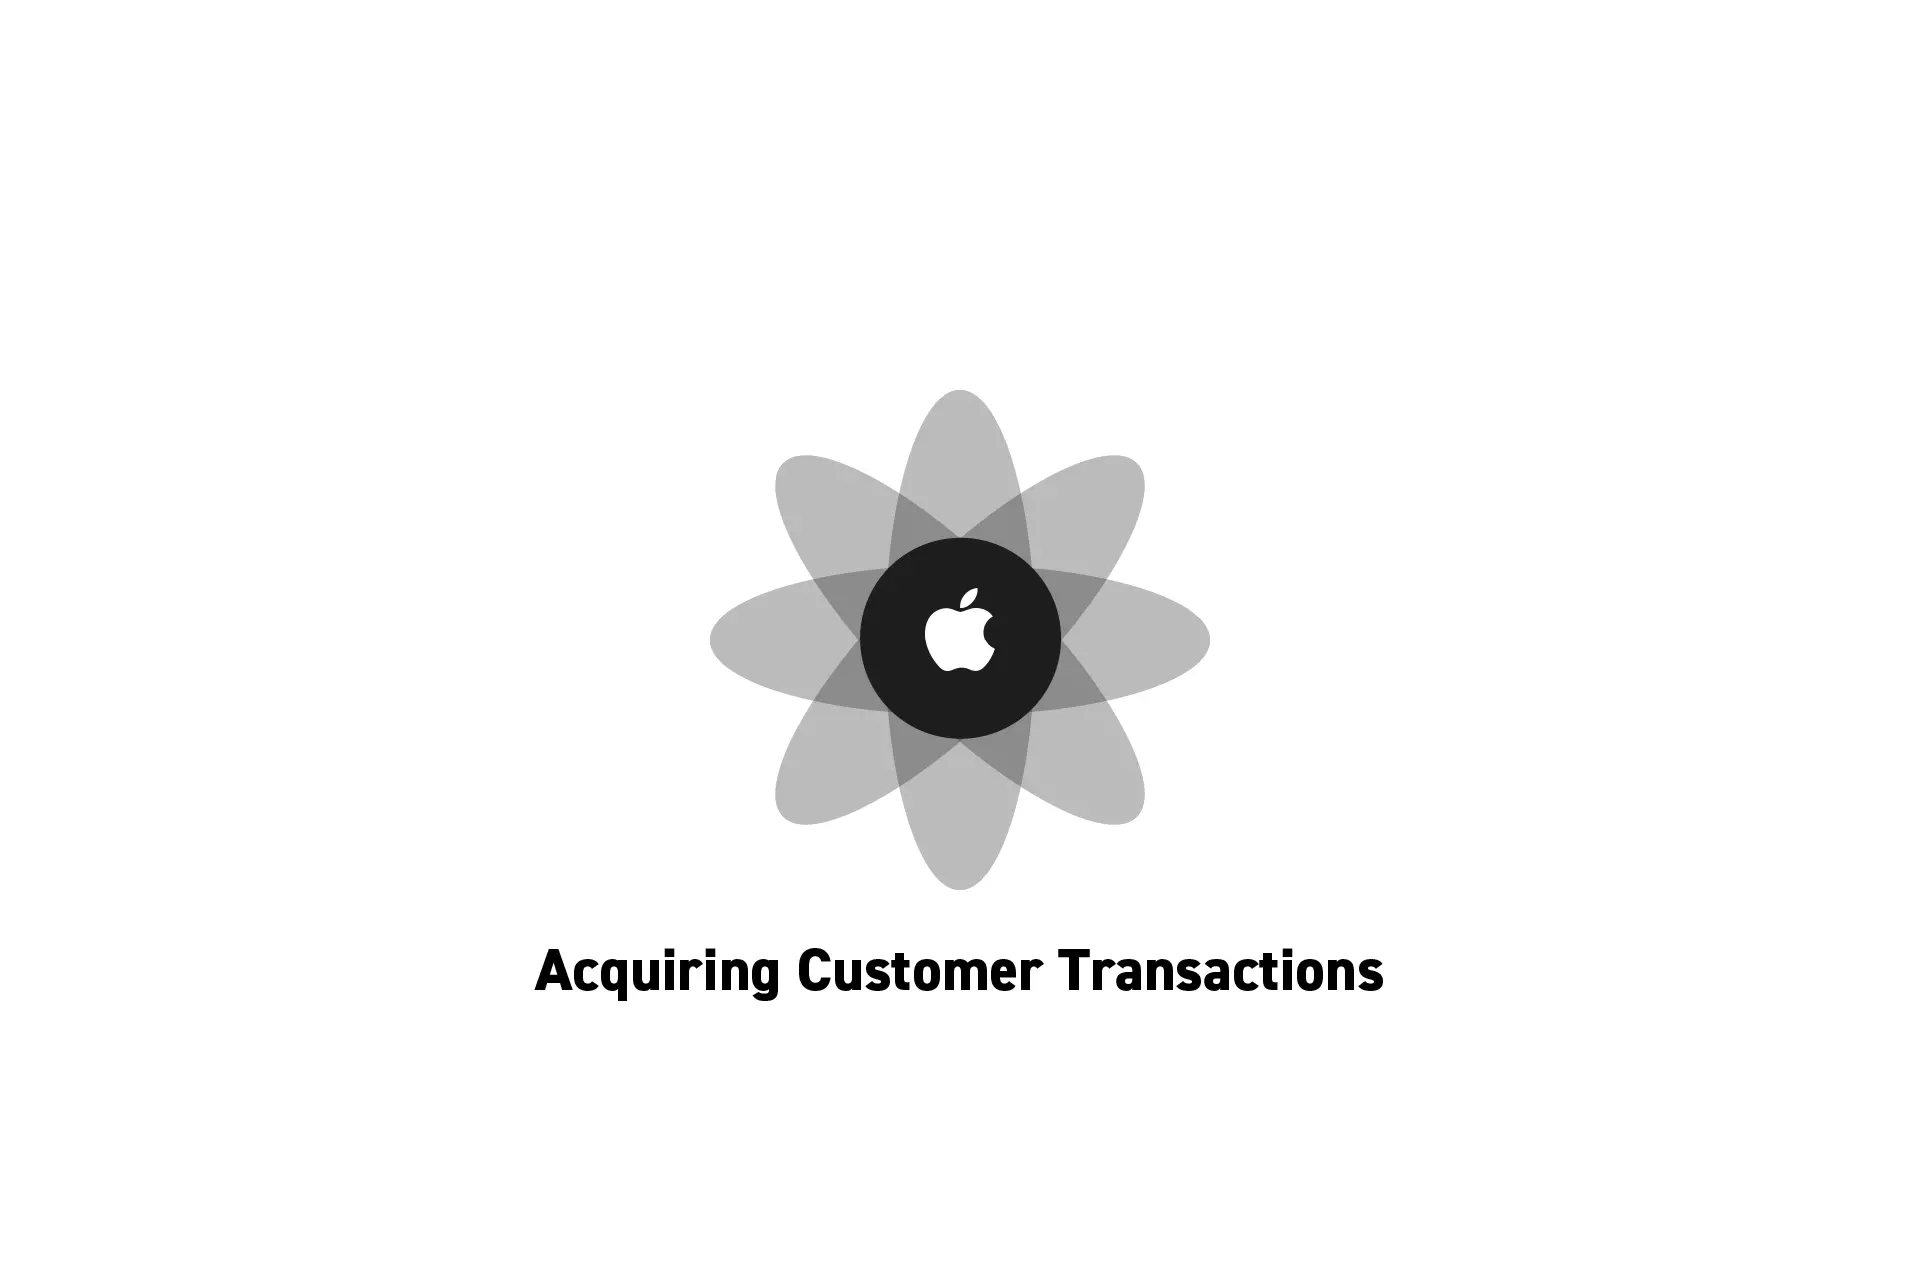 A flower that represents Apple with the text "Acquiring Customer Transactions" beneath it.